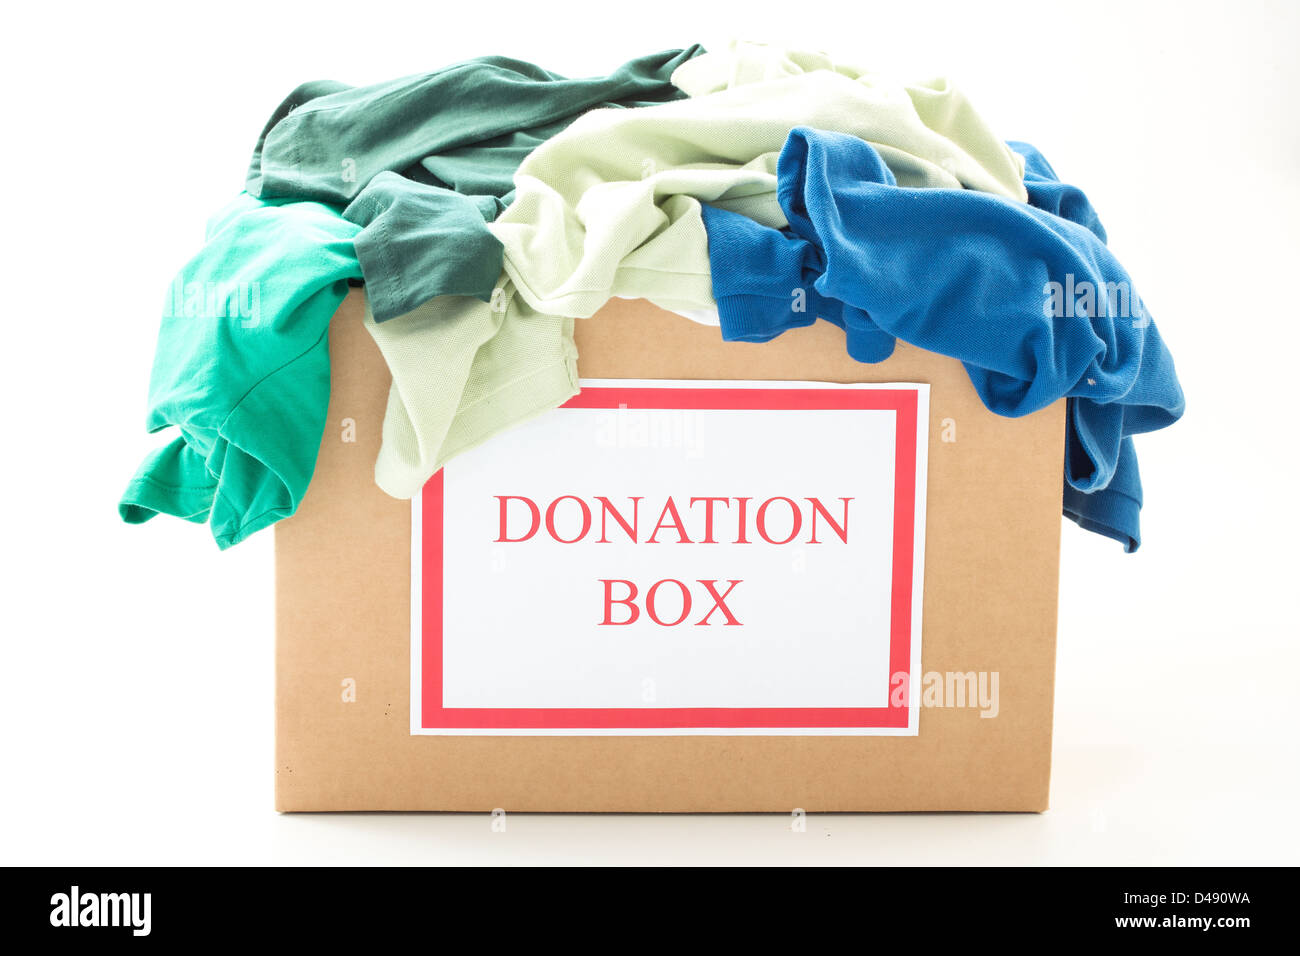 Cardboard donation box with clothes Stock Photo